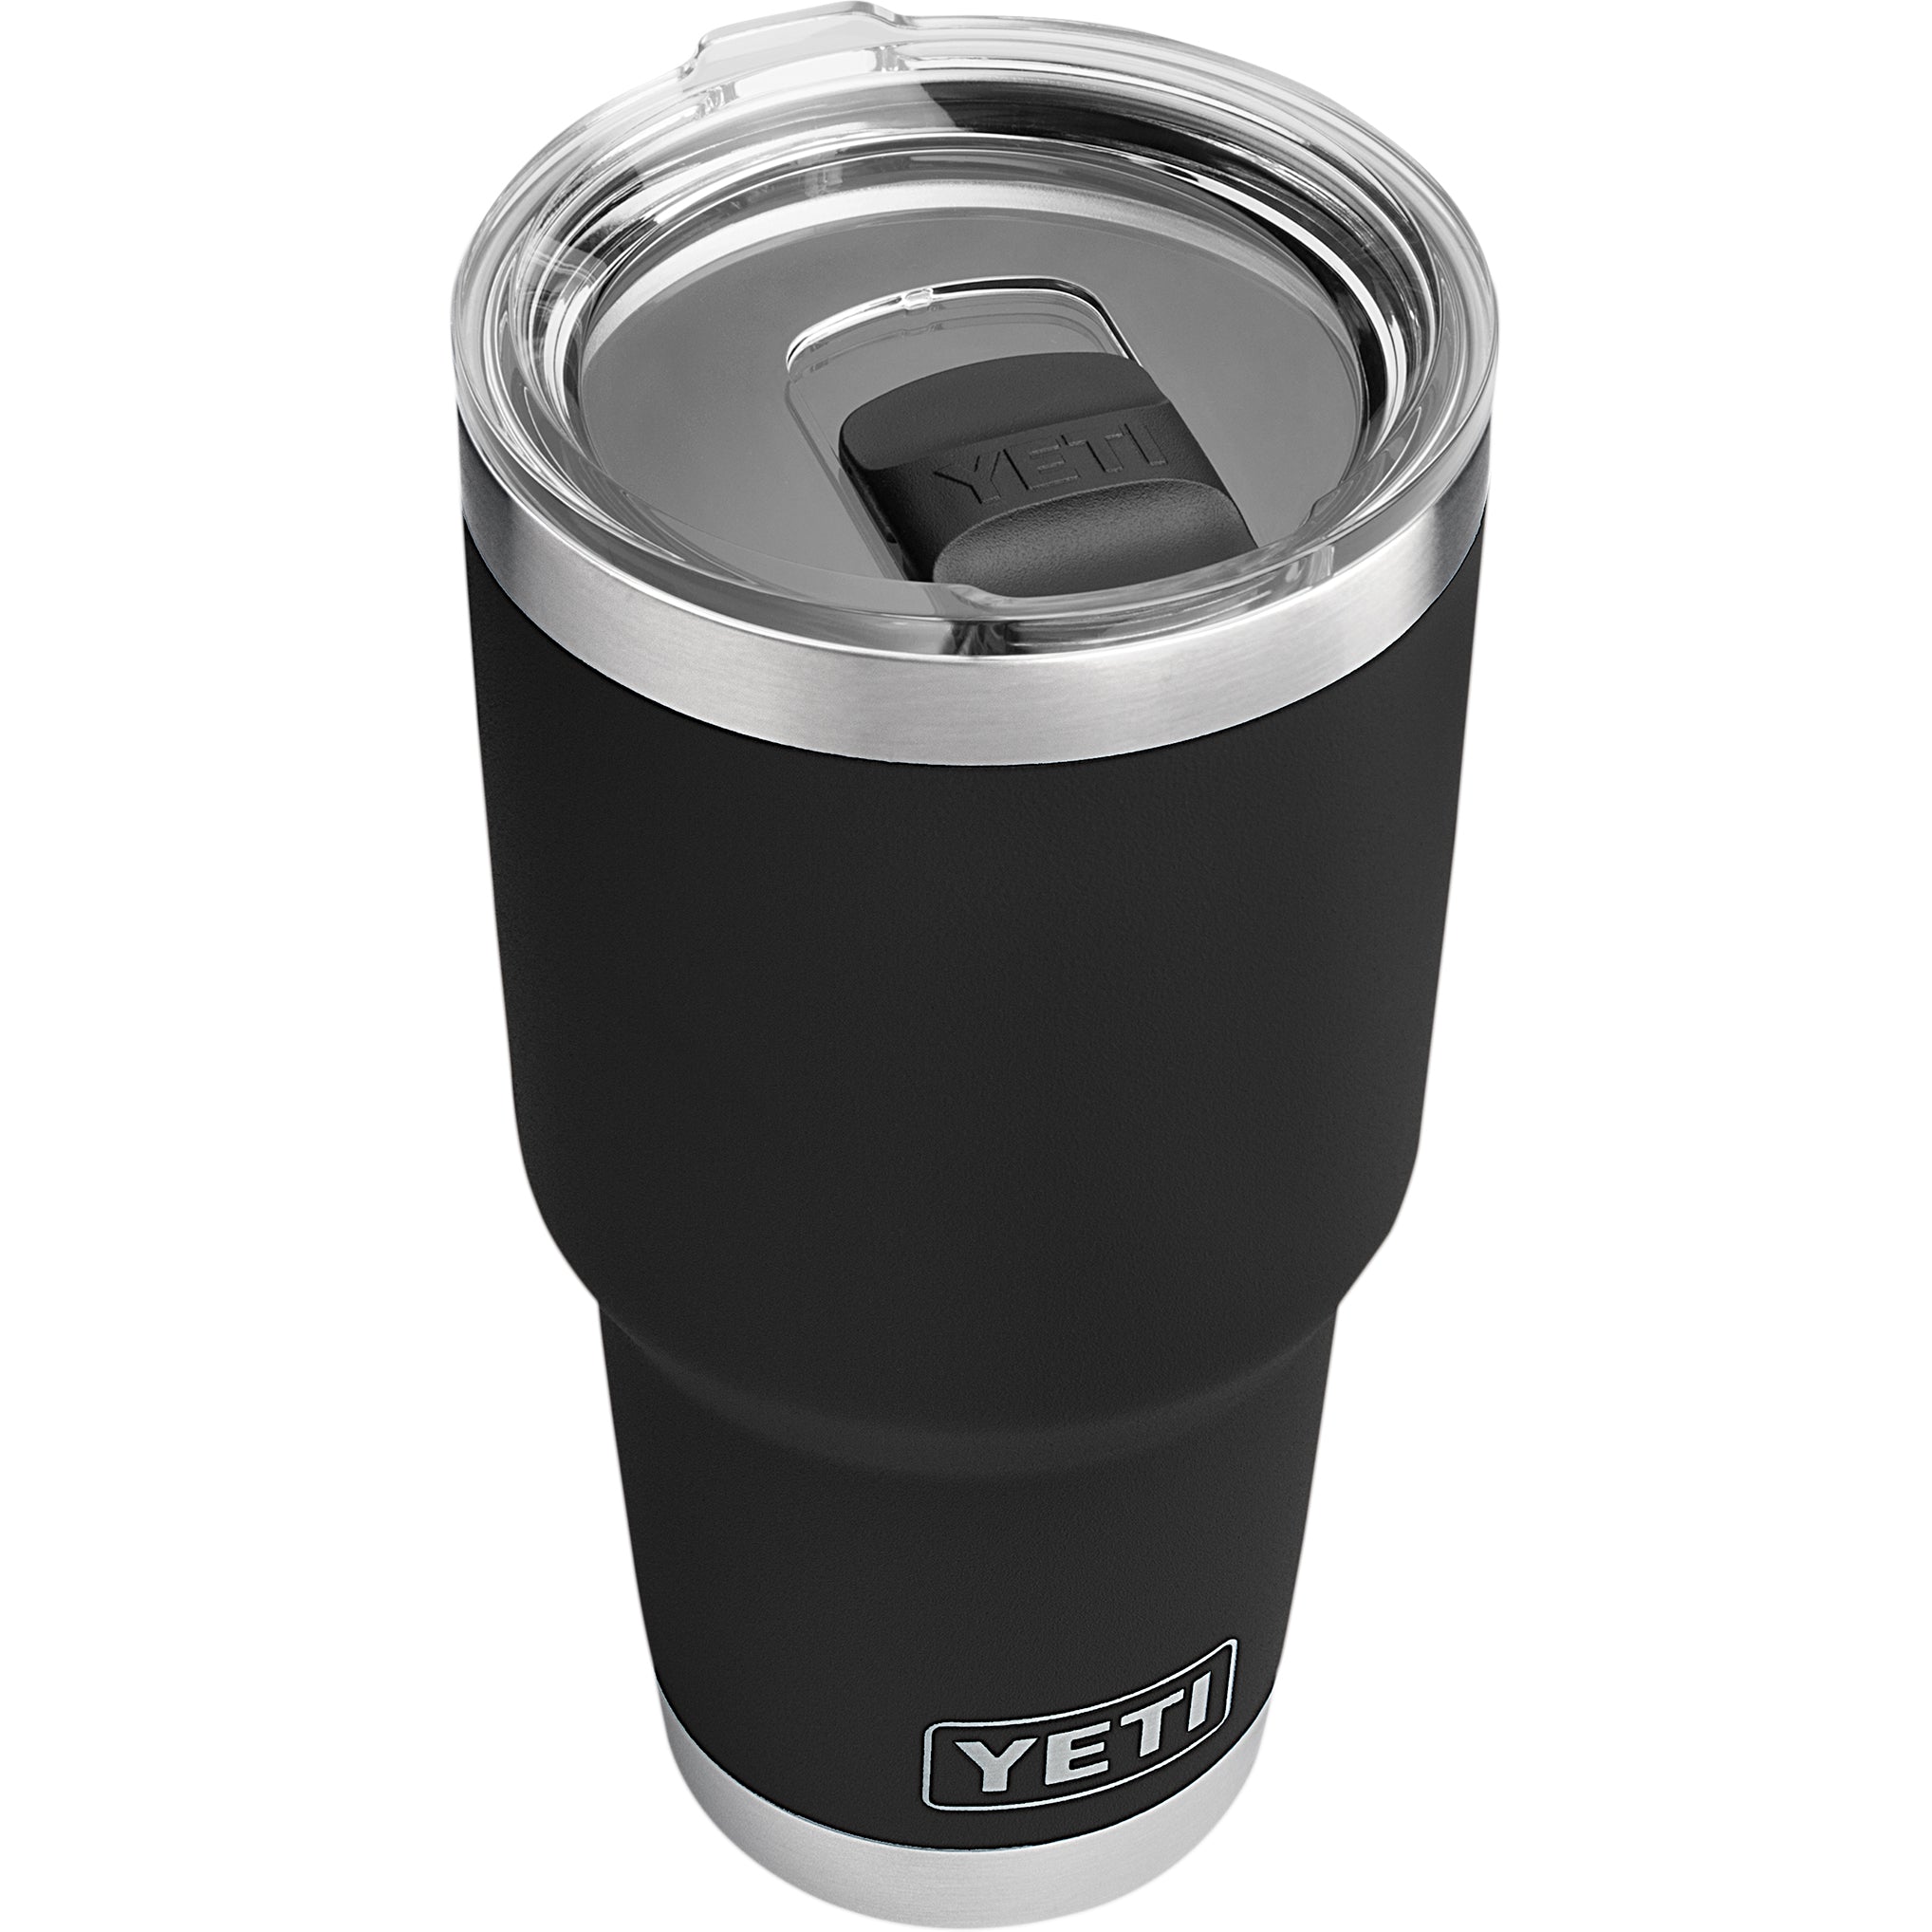 30 oz Tumbler Lid, Replacement Lids Compatible for YETI 30 oz Tumbler, 14  oz Mug and 35 oz Straw Mug, 2 Pack Travel Spill Proof Cup Lids Covers with Magnetic  Slider Switch, BPA Free